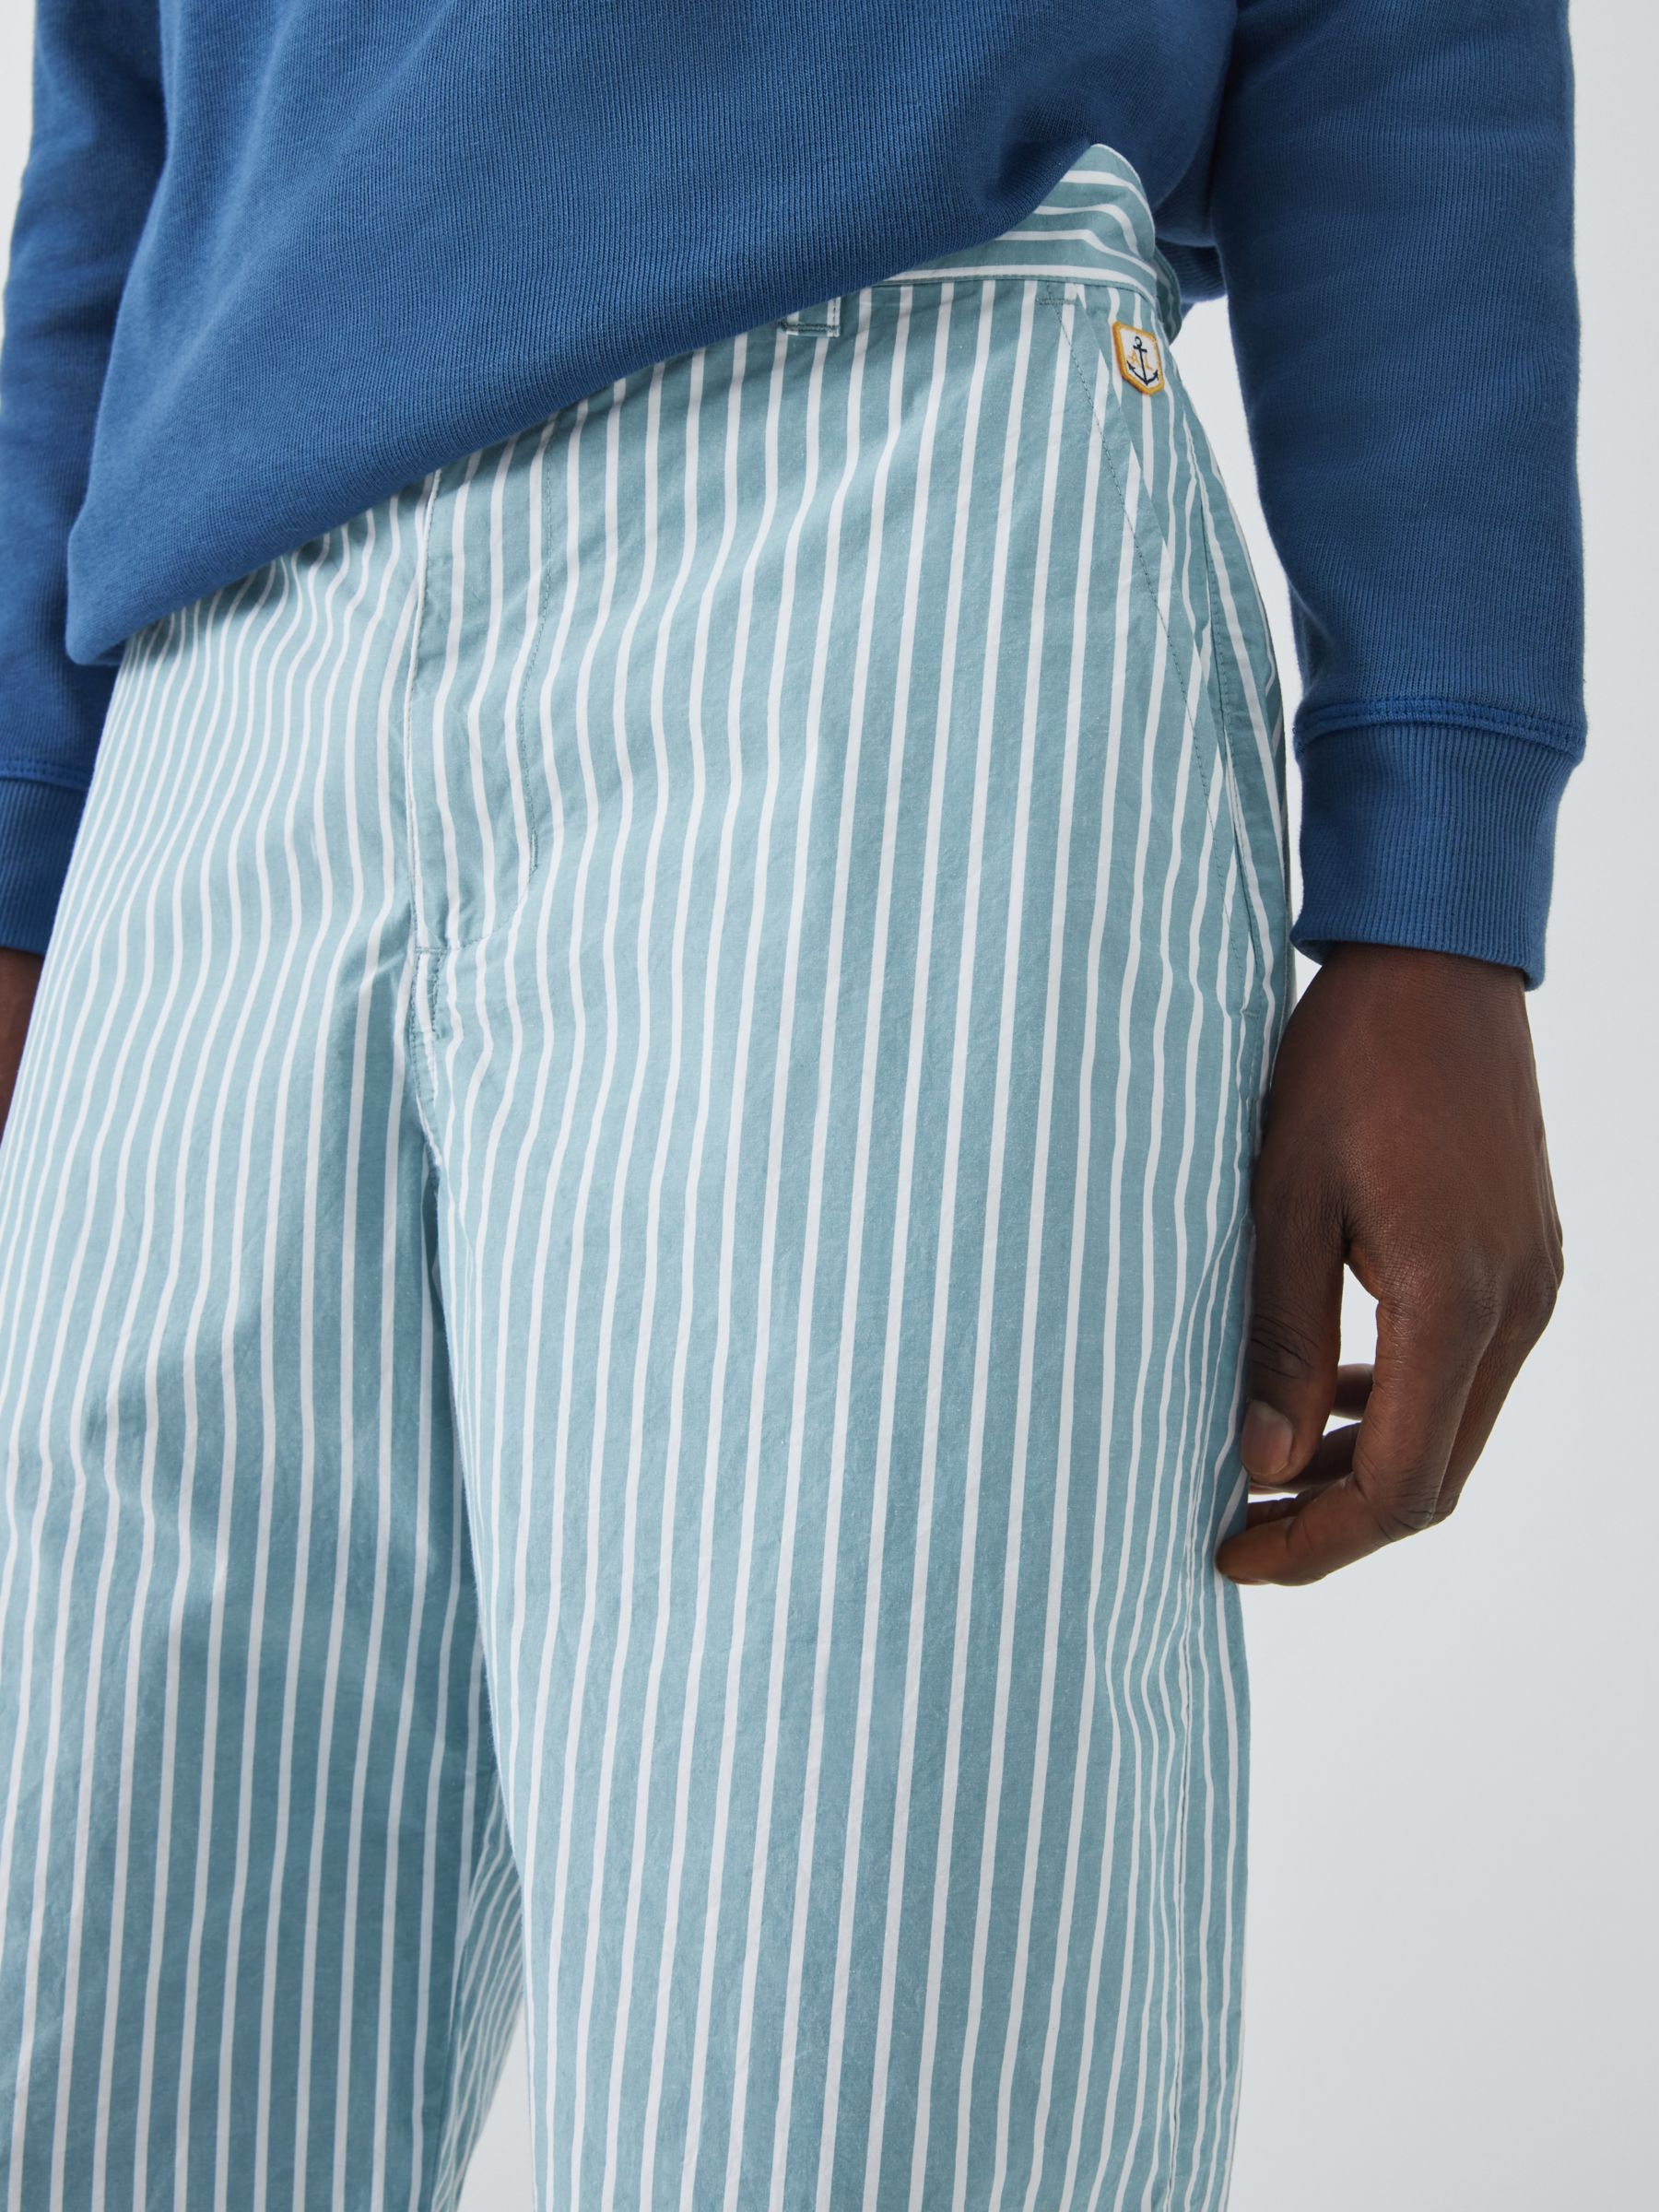 Buy Armor Lux Raye Heritage Striped Shorts, Blue/White Online at johnlewis.com